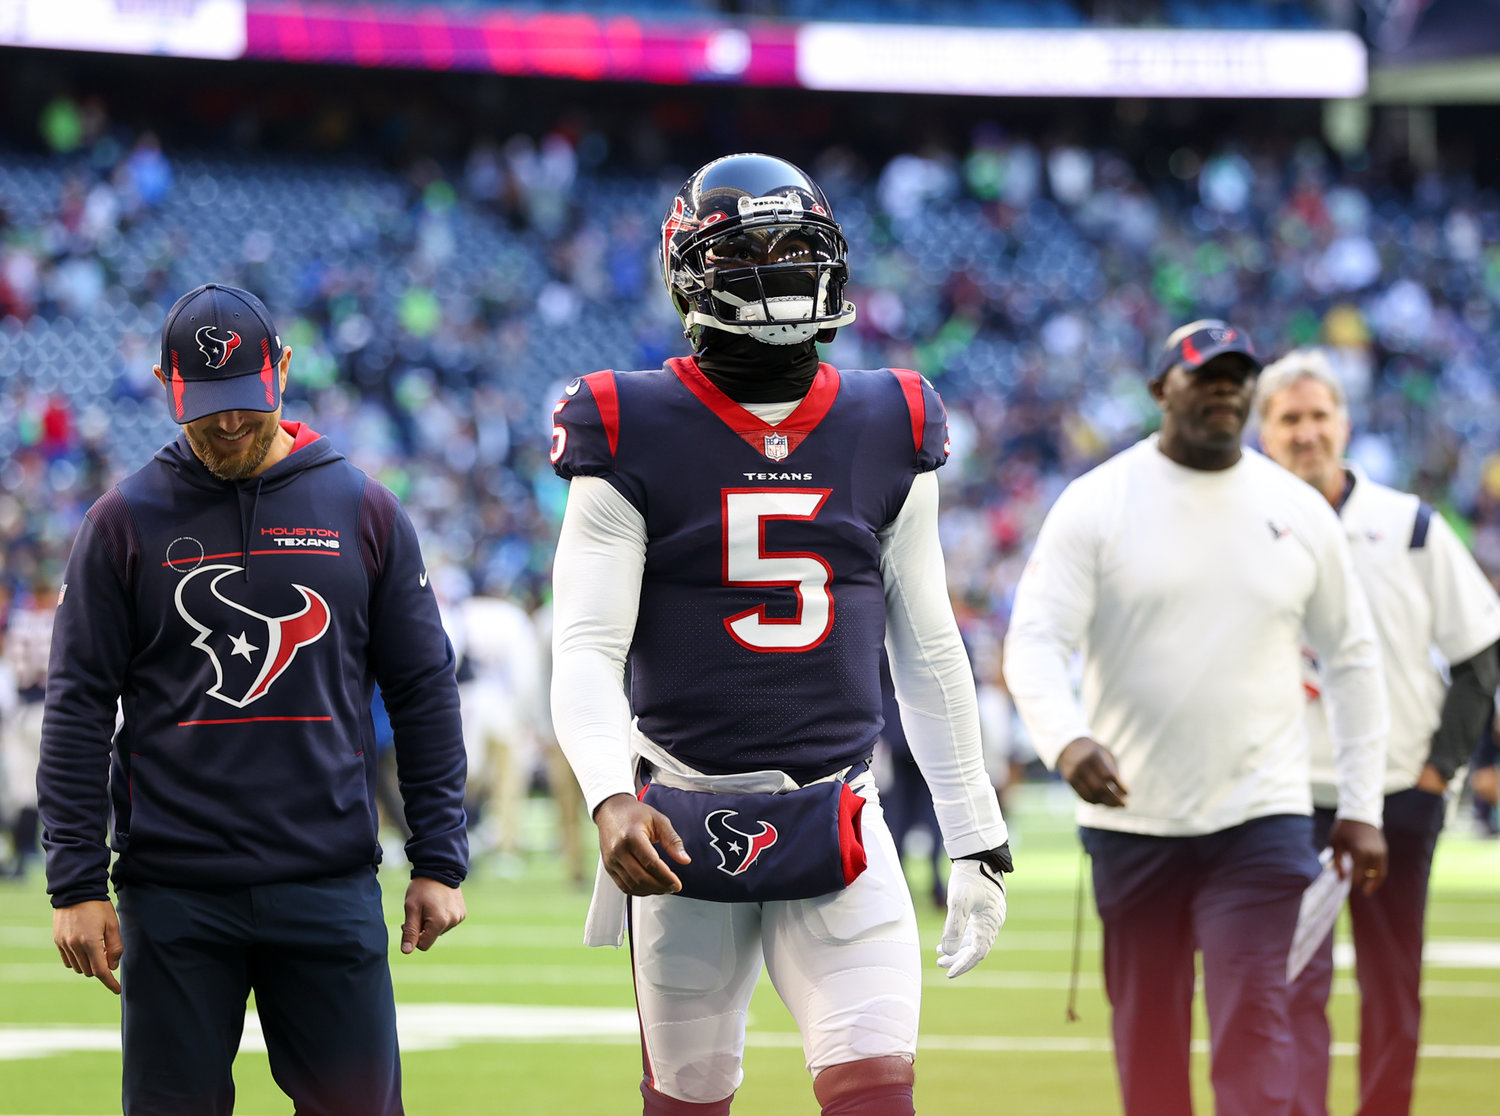 Houston Texans quarterback Tyrod Taylor (5) leaves the field after a 33-13 loss to Seattle on December 12, 2021 in Houston, Texas. Taylor did not play in the game.